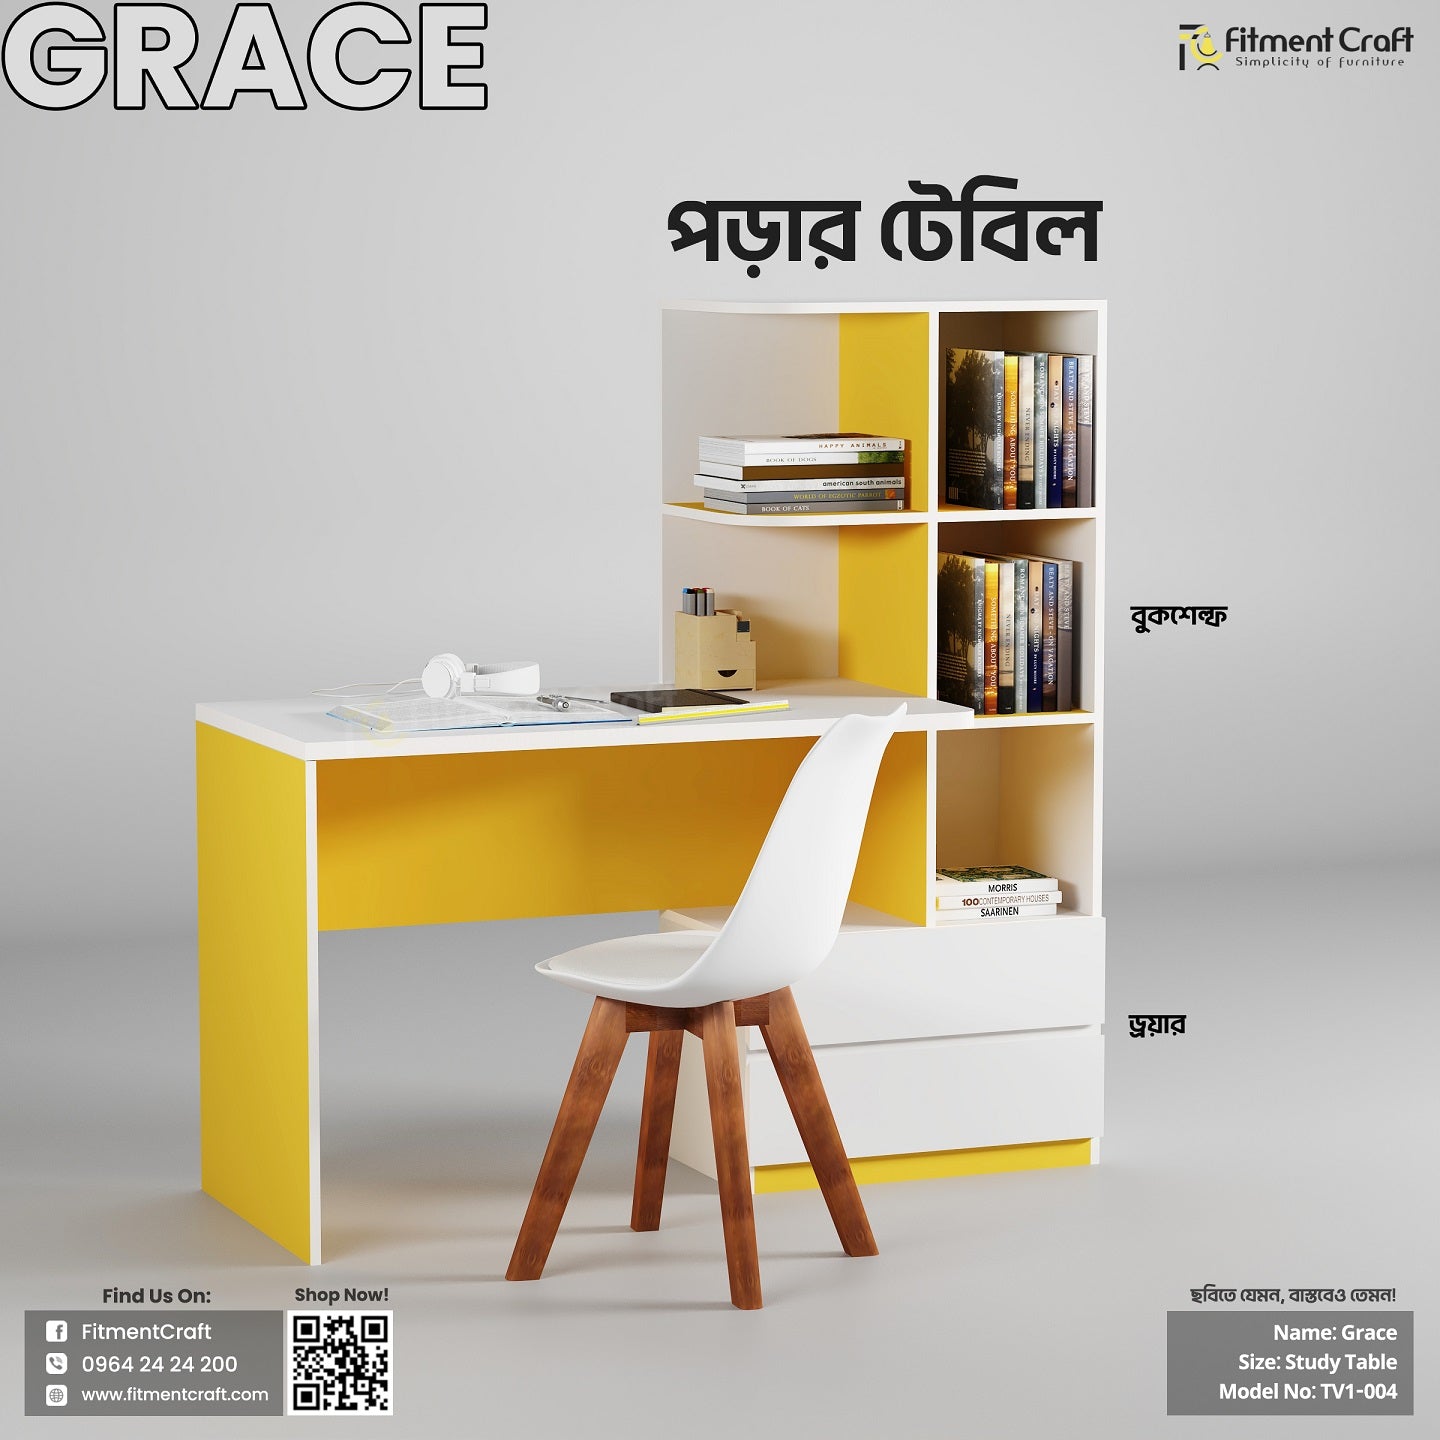 Grace Table with Tulip Chair | CMB-001